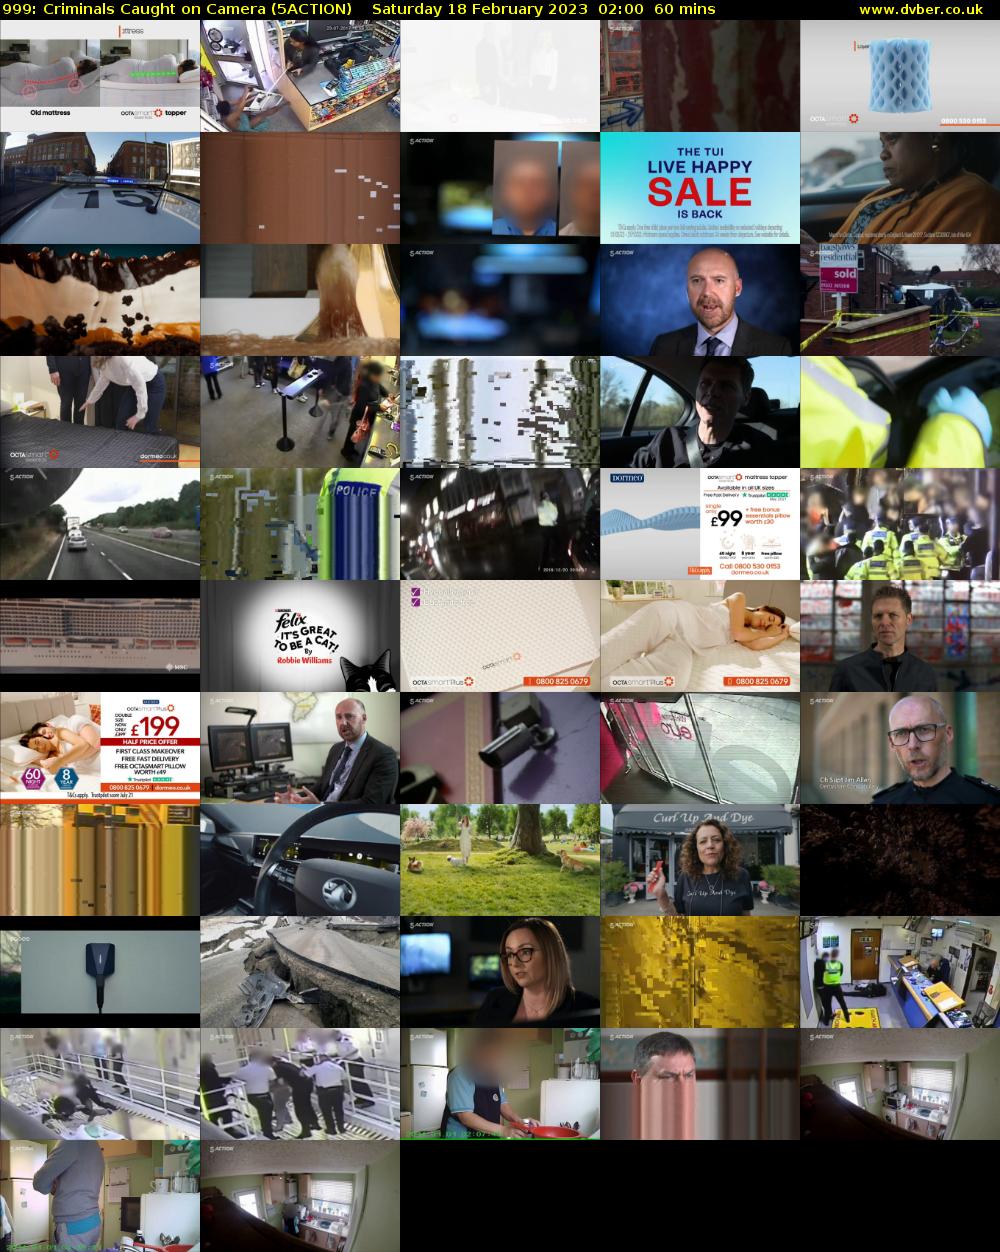 999: Criminals Caught on Camera (5ACTION) Saturday 18 February 2023 02:00 - 03:00